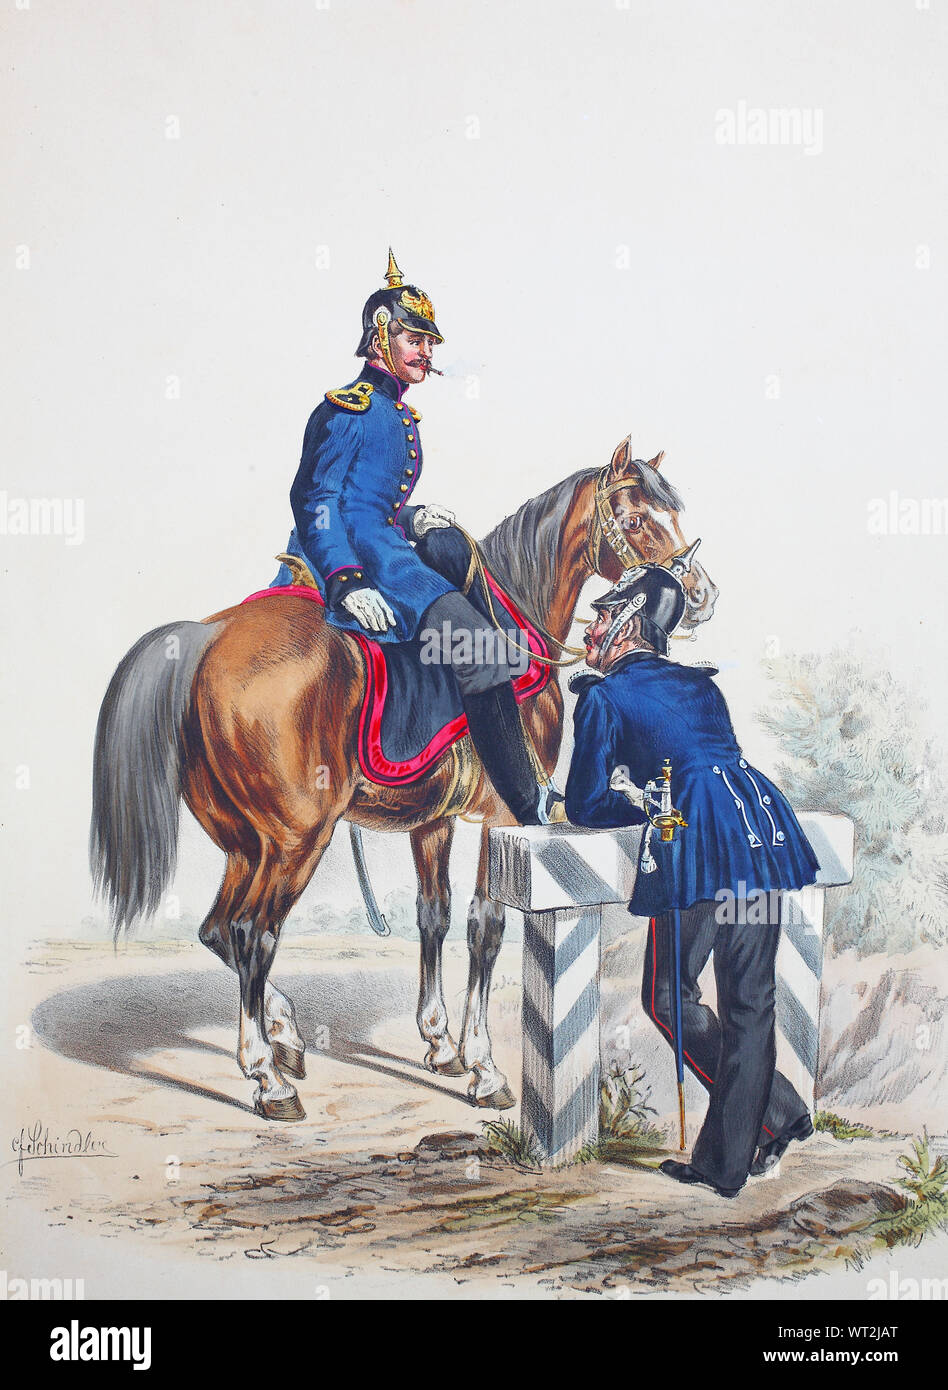 Royal Prussian Army, Guards Corps, Preußens Heer, preussische Garde, Rossarzt und Zahlmeister, Digital improved reproduction of an illustration from the 19th century Stock Photo